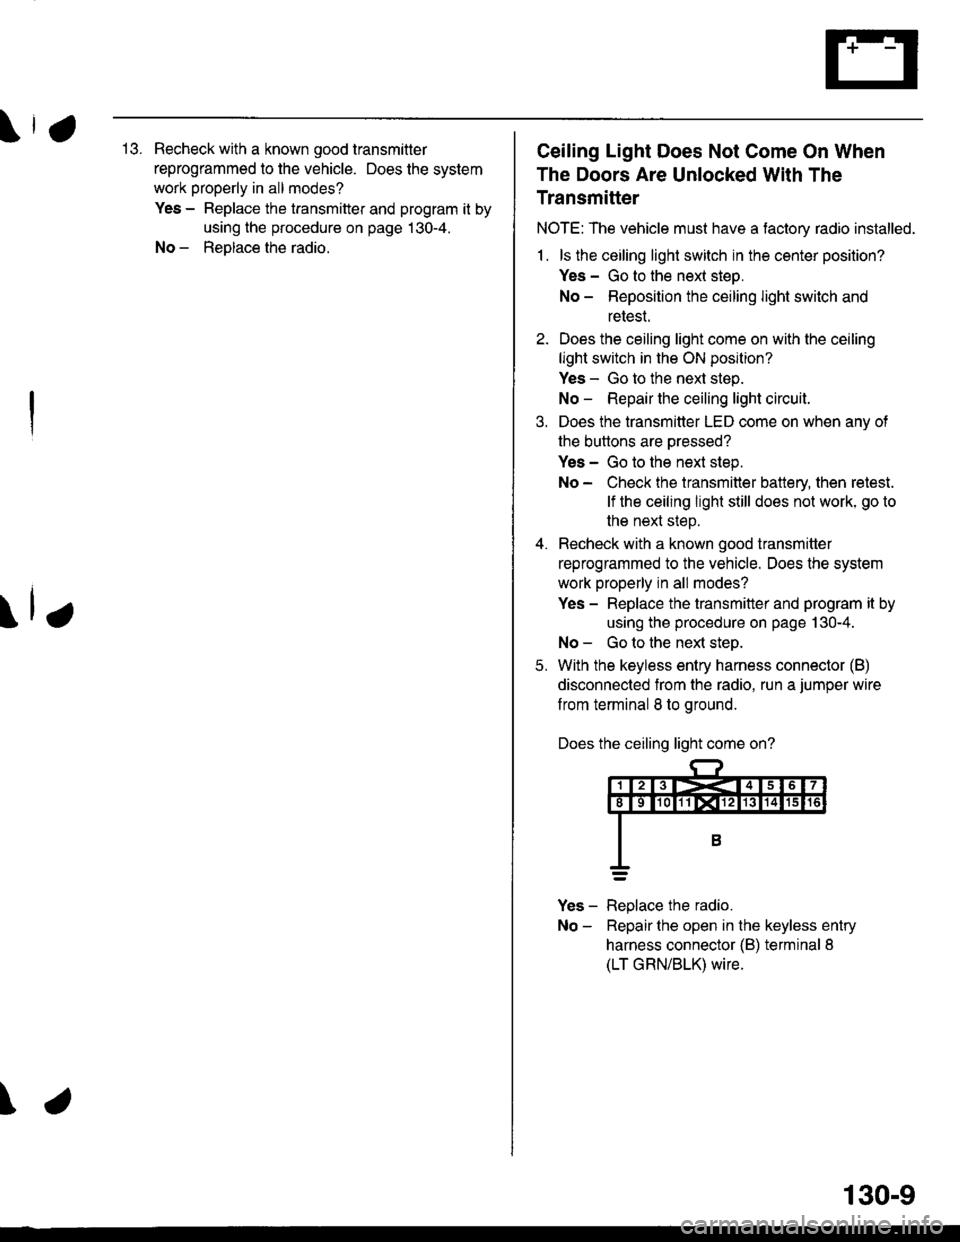 HONDA CIVIC 1996 6.G Owners Manual \,113. Recheck with a known good transmitler
reprogrammed to the vehicle. Does the system
work properly in all modes?
Yes - Replace the transmitter and program it by
using the procedure on page 130-4.